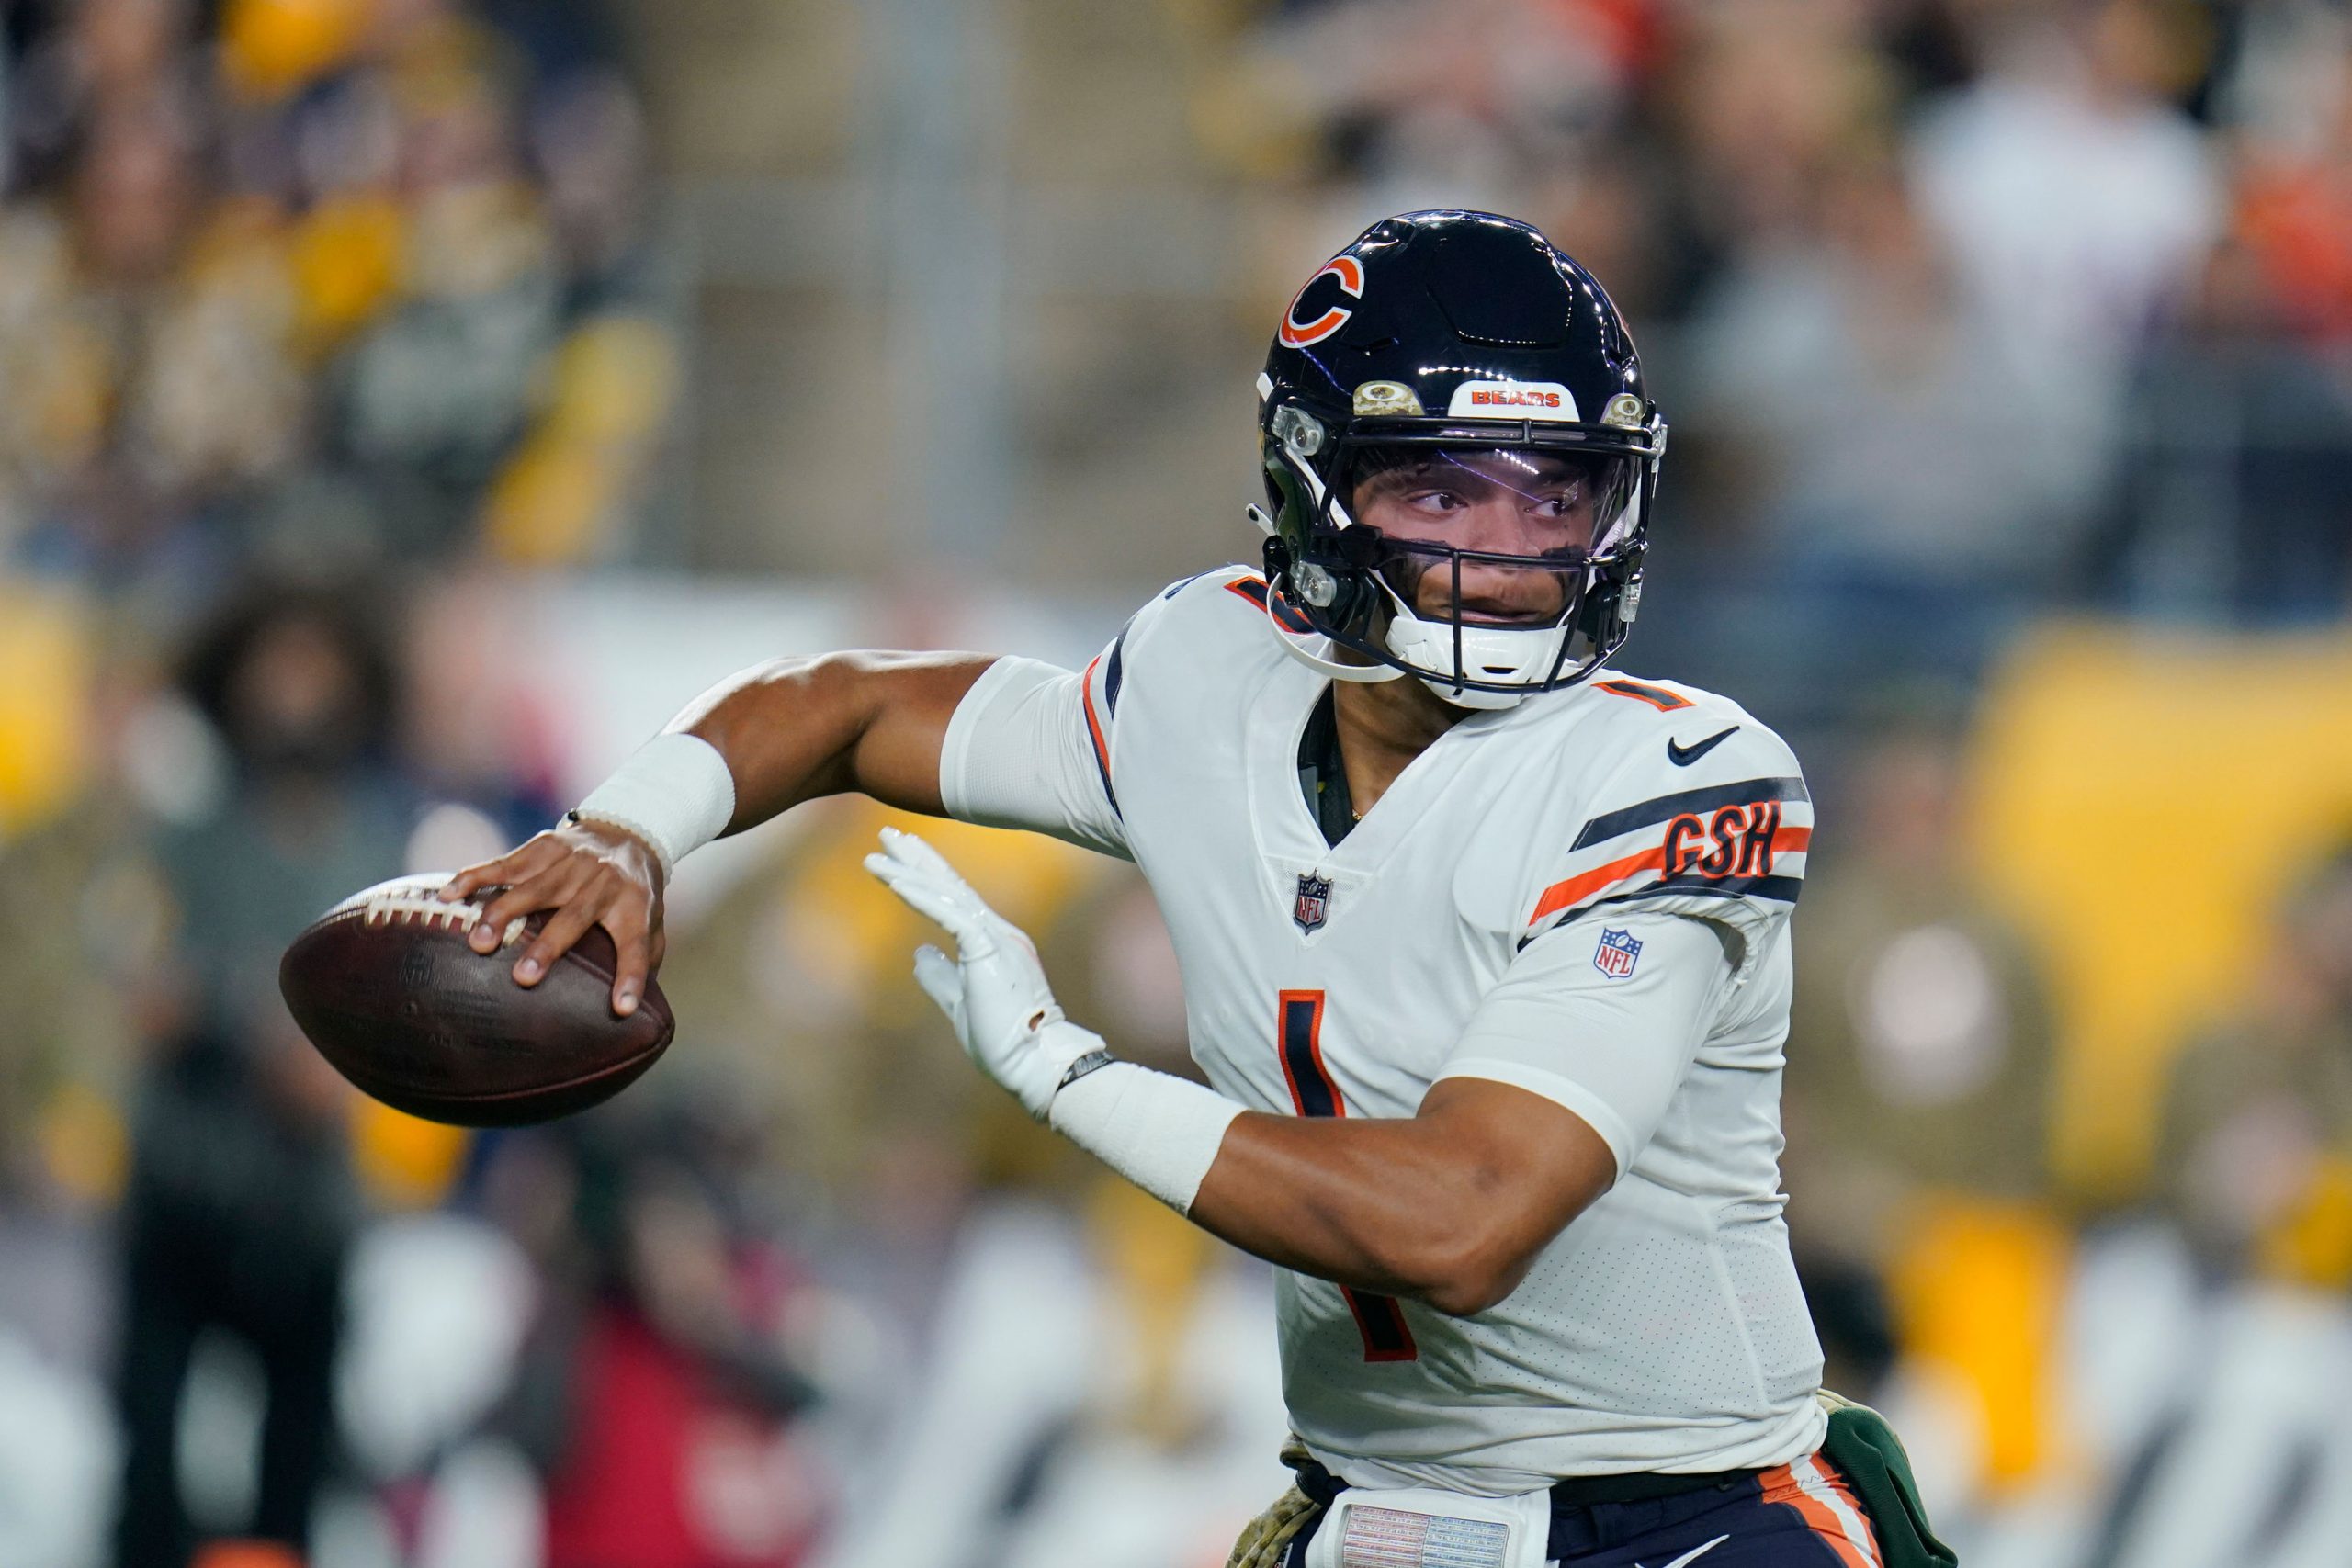 Bears rookie quarterback Justin Fields nearly has his moment vs Steelers